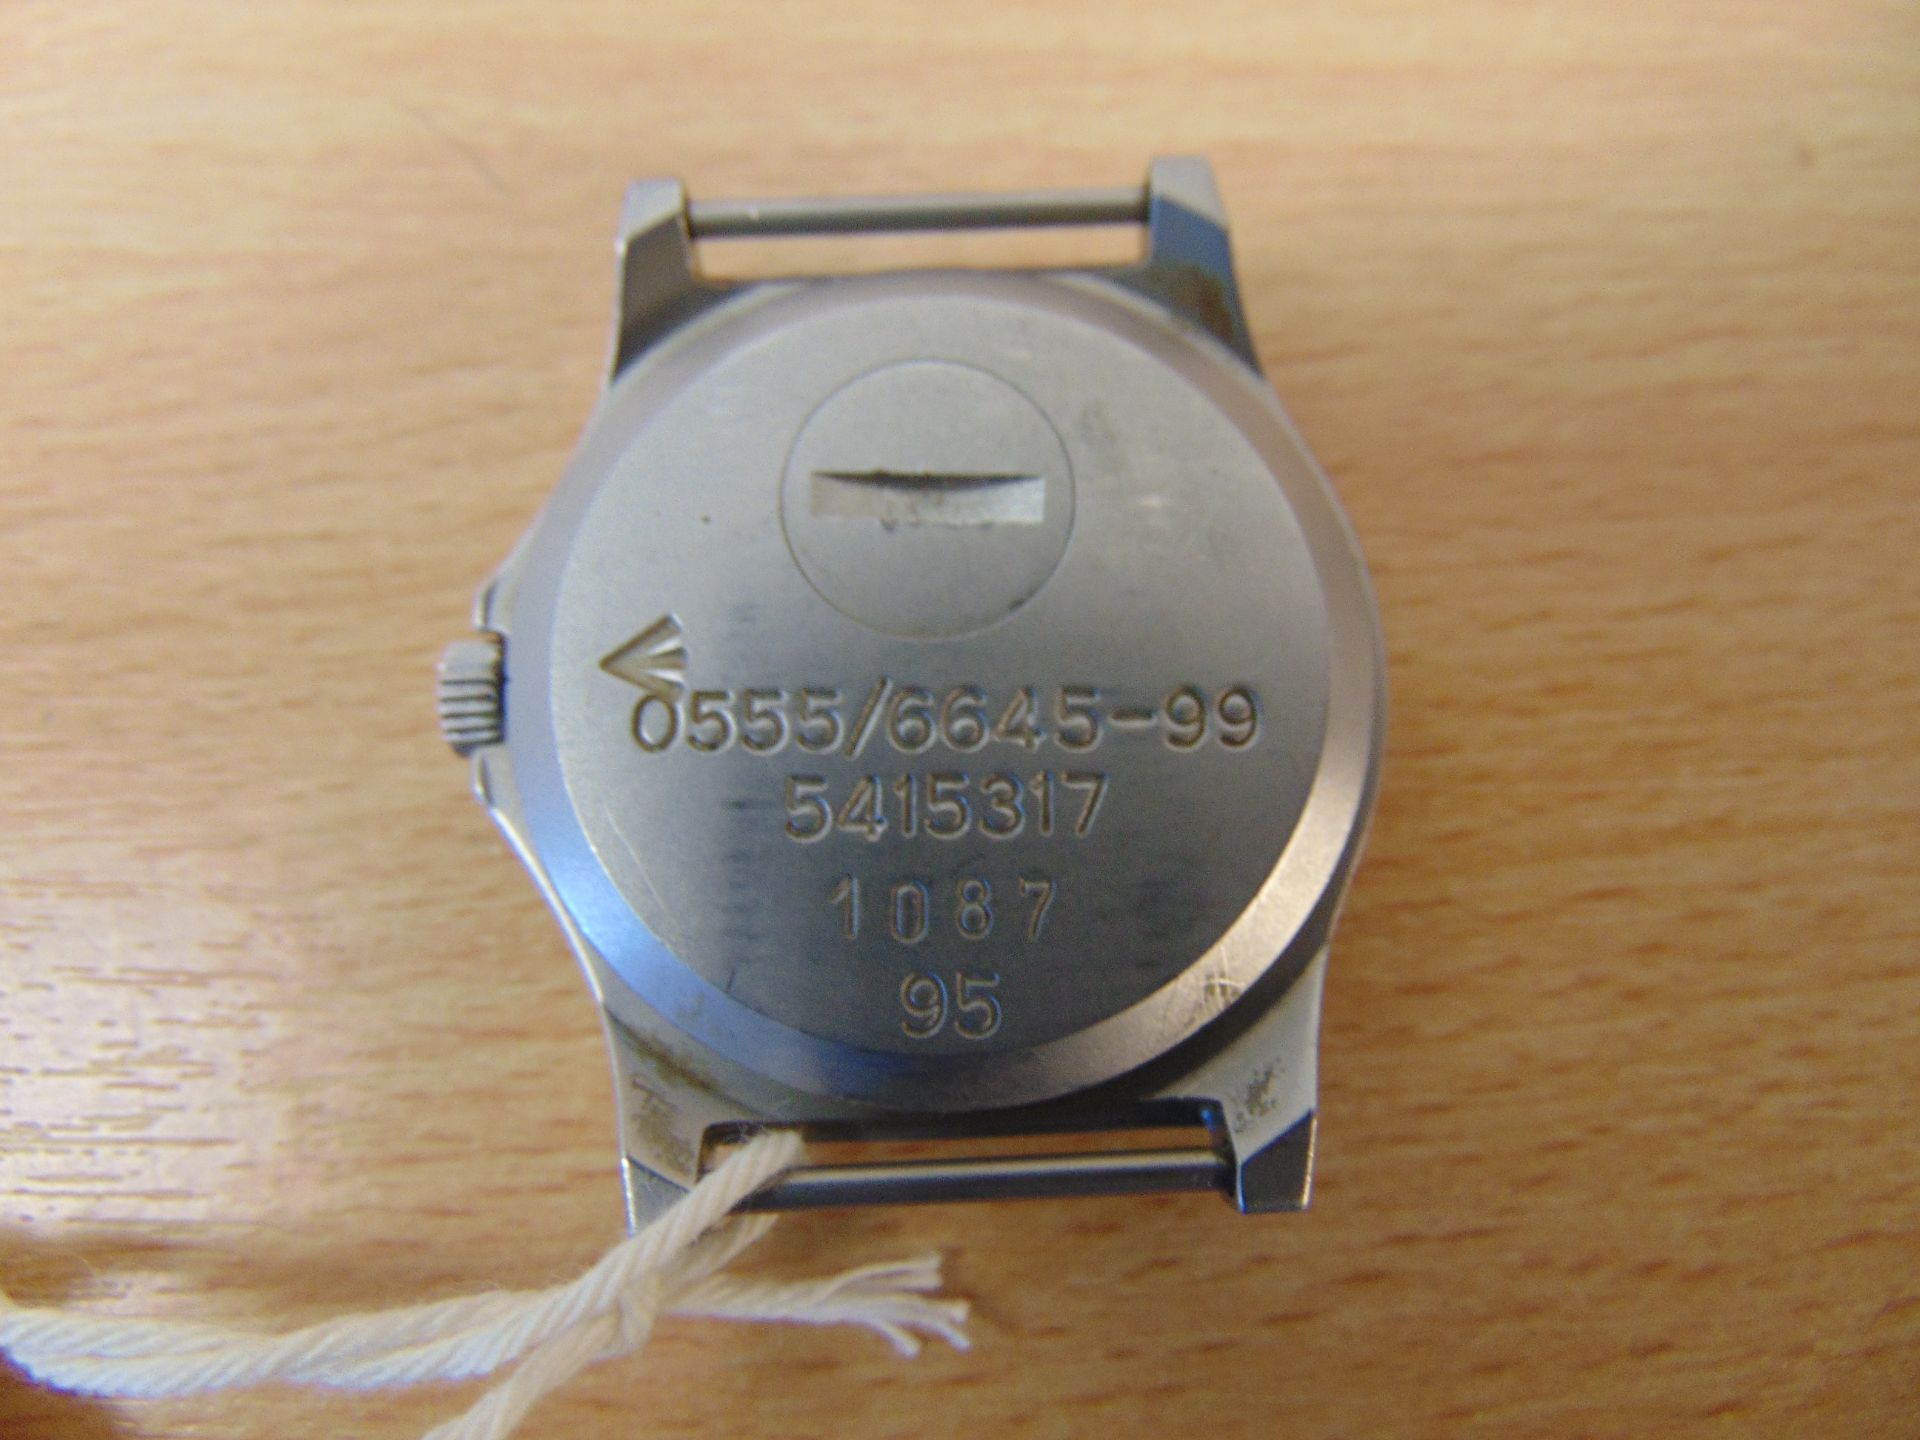 CWC 0555 R.Marines service watch with Nato Marks and broad arrow, small chip in glass, Date 1995 - Image 3 of 4